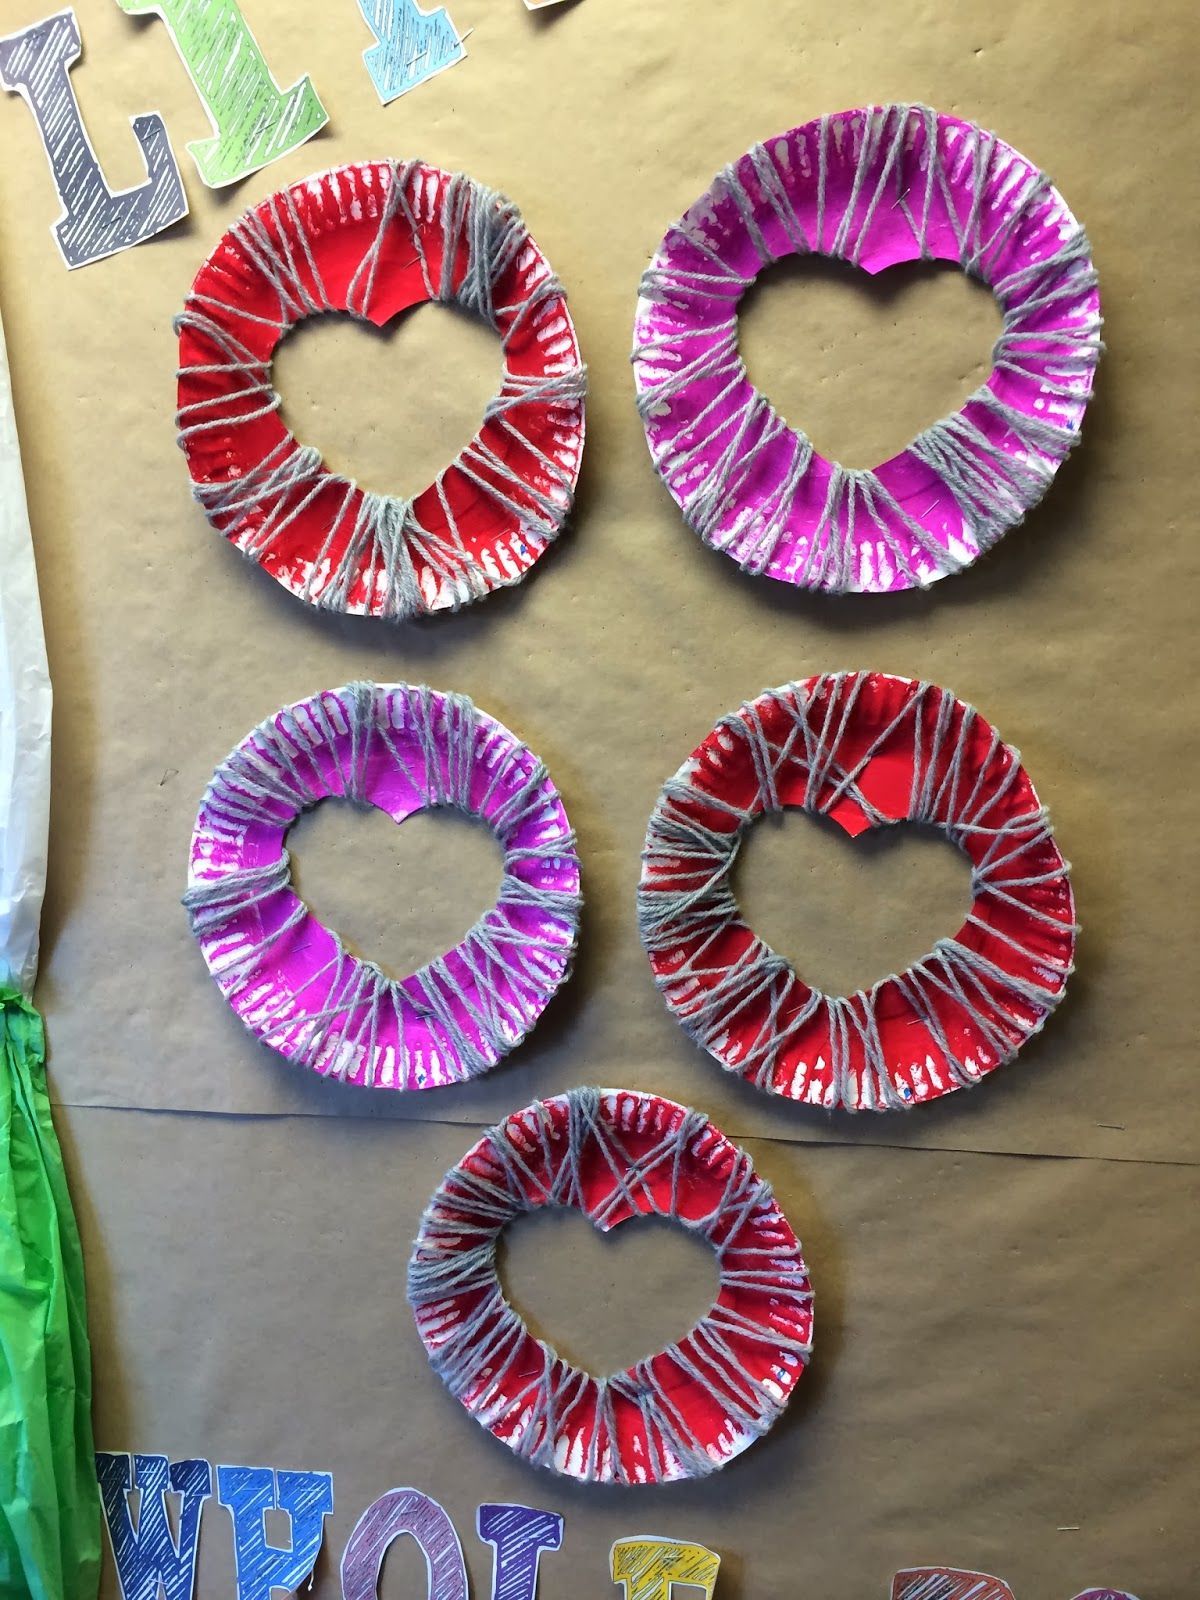 Making “Exploding Hearts” to practice fine motor control and to celebrate Valentine’s Day. Students work with the concept of